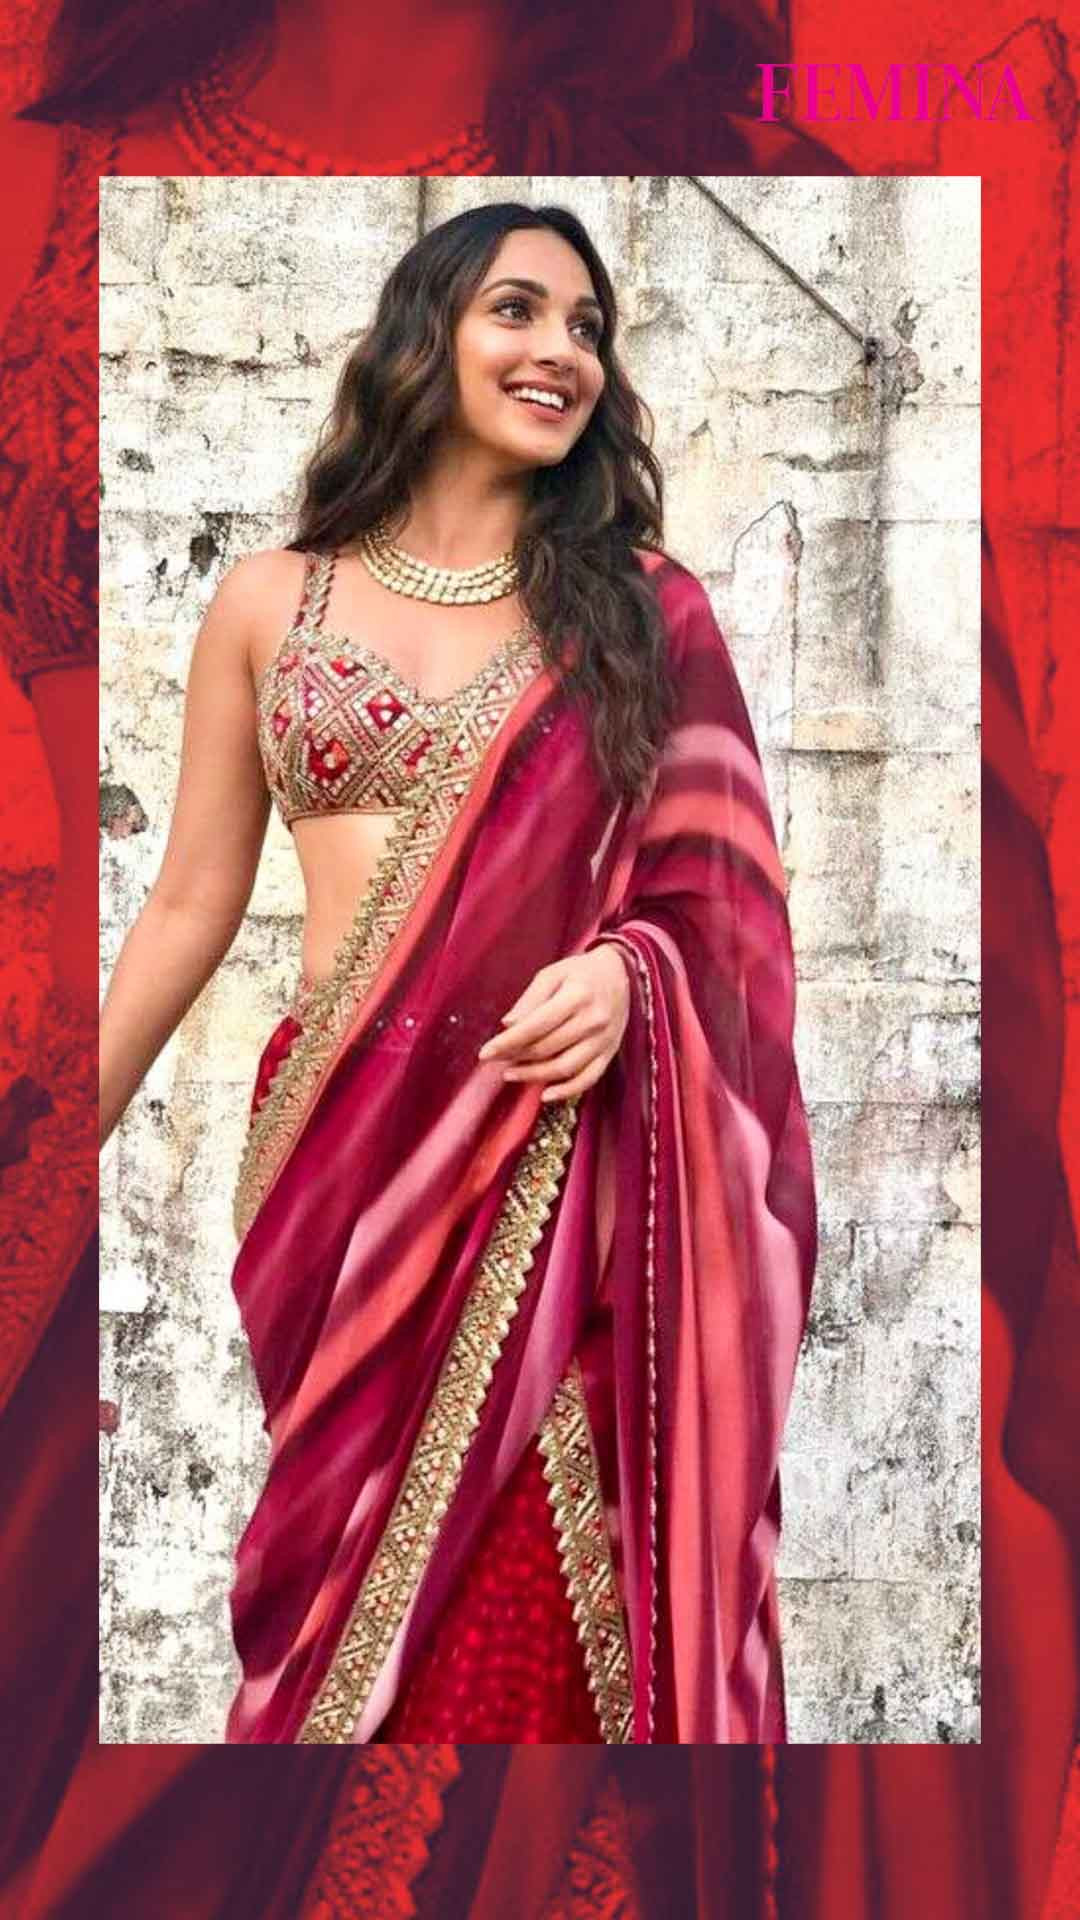 10 Totally LIT Bridal dupatta draping styles you NEED to See! - Witty Vows  | Indian bridal, Bridal dupatta, Dupatta draping styles